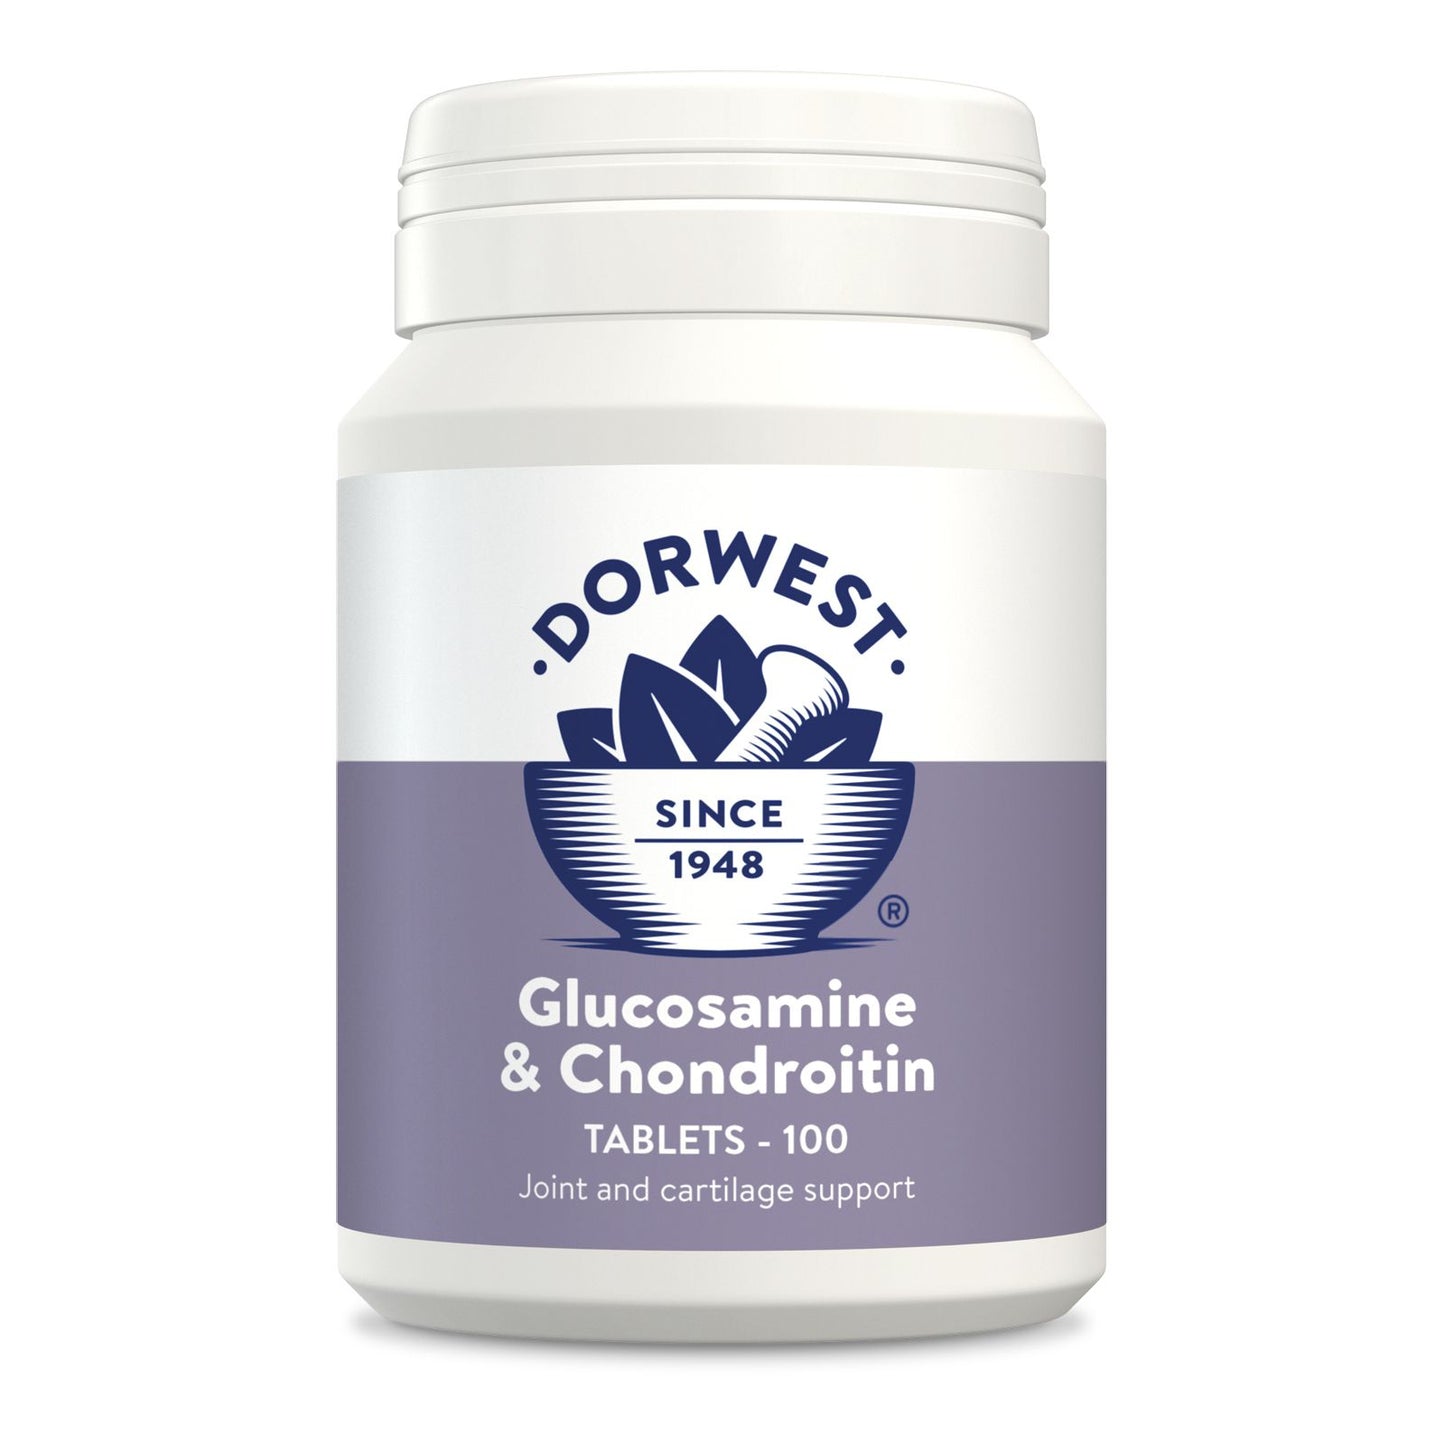 Dorwest Glucosamine & Chondroitin Tablets For Dogs And Cats